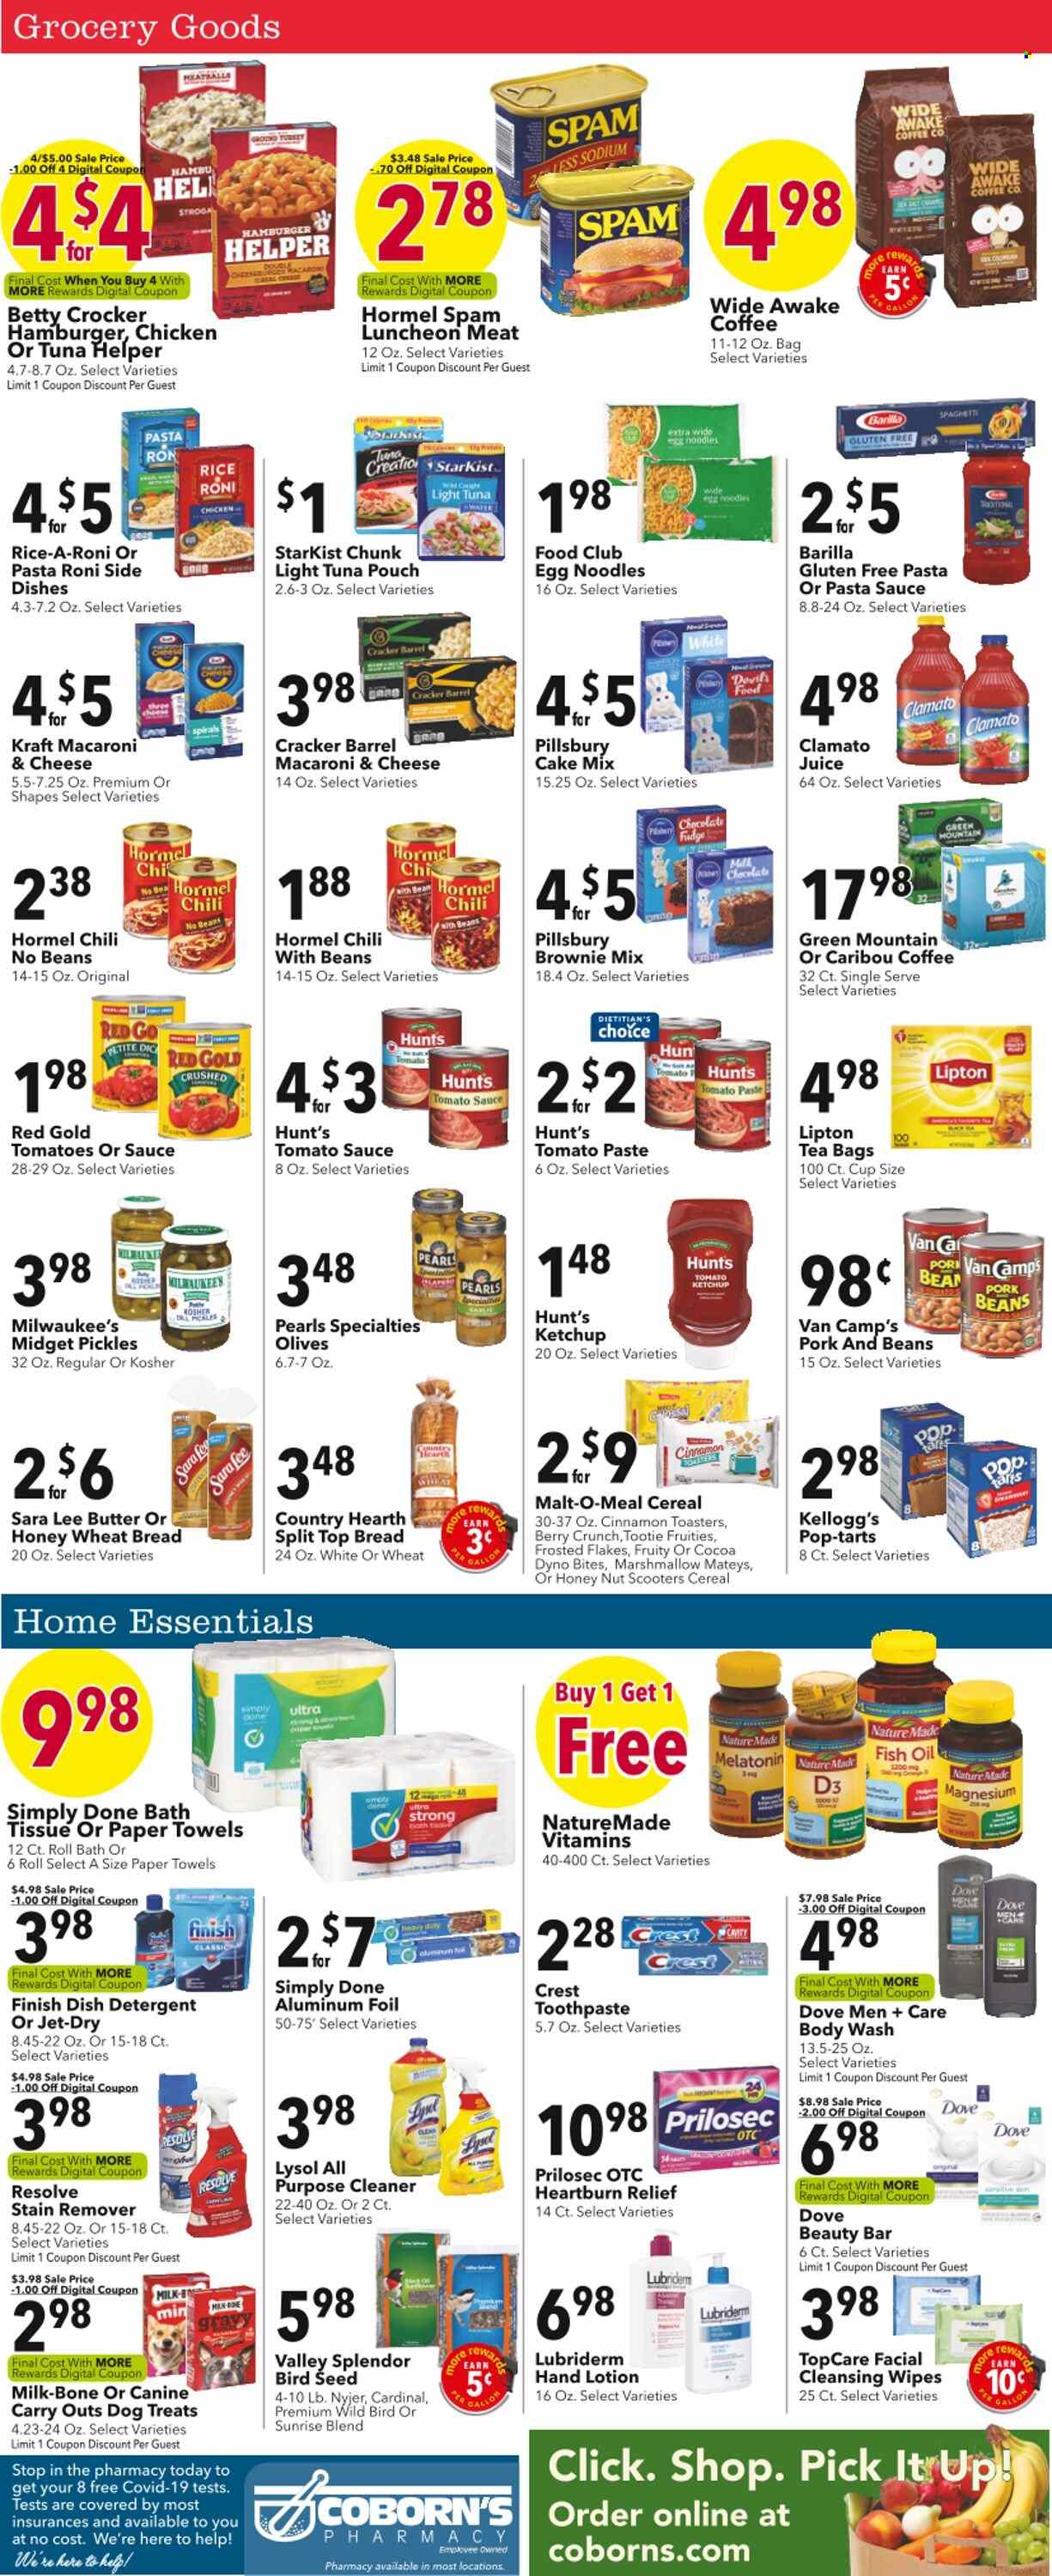 thumbnail - Coborn's Flyer - 03/22/2023 - 03/28/2023 - Sales products - wheat bread, Sara Lee, brownie mix, cake mix, tuna, StarKist, macaroni & cheese, spaghetti, pasta sauce, meatballs, Pillsbury, Barilla, noodles, Kraft®, Hormel, Spam, lunch meat, butter, Dove, fudge, marshmallows, milk chocolate, crackers, Kellogg's, Pop-Tarts, malt, tomato paste, tomato sauce, pickles, olives, light tuna, cereals, Frosted Flakes, rice, egg noodles, cinnamon, ketchup, juice, Lipton, Clamato, water, tea bags, coffee, Green Mountain, Ron Pelicano, chicken, cleansing wipes, wipes, bath tissue, kitchen towels, paper towels, detergent, cleaner, all purpose cleaner, stain remover, Lysol, dishwasher cleaner, Jet, body wash, toothpaste, Crest, body lotion, Lubriderm, cup, aluminium foil, animal food, bird food, fish oil, magnesium, Melatonin, Nature Made, vitamin D3. Page 3.